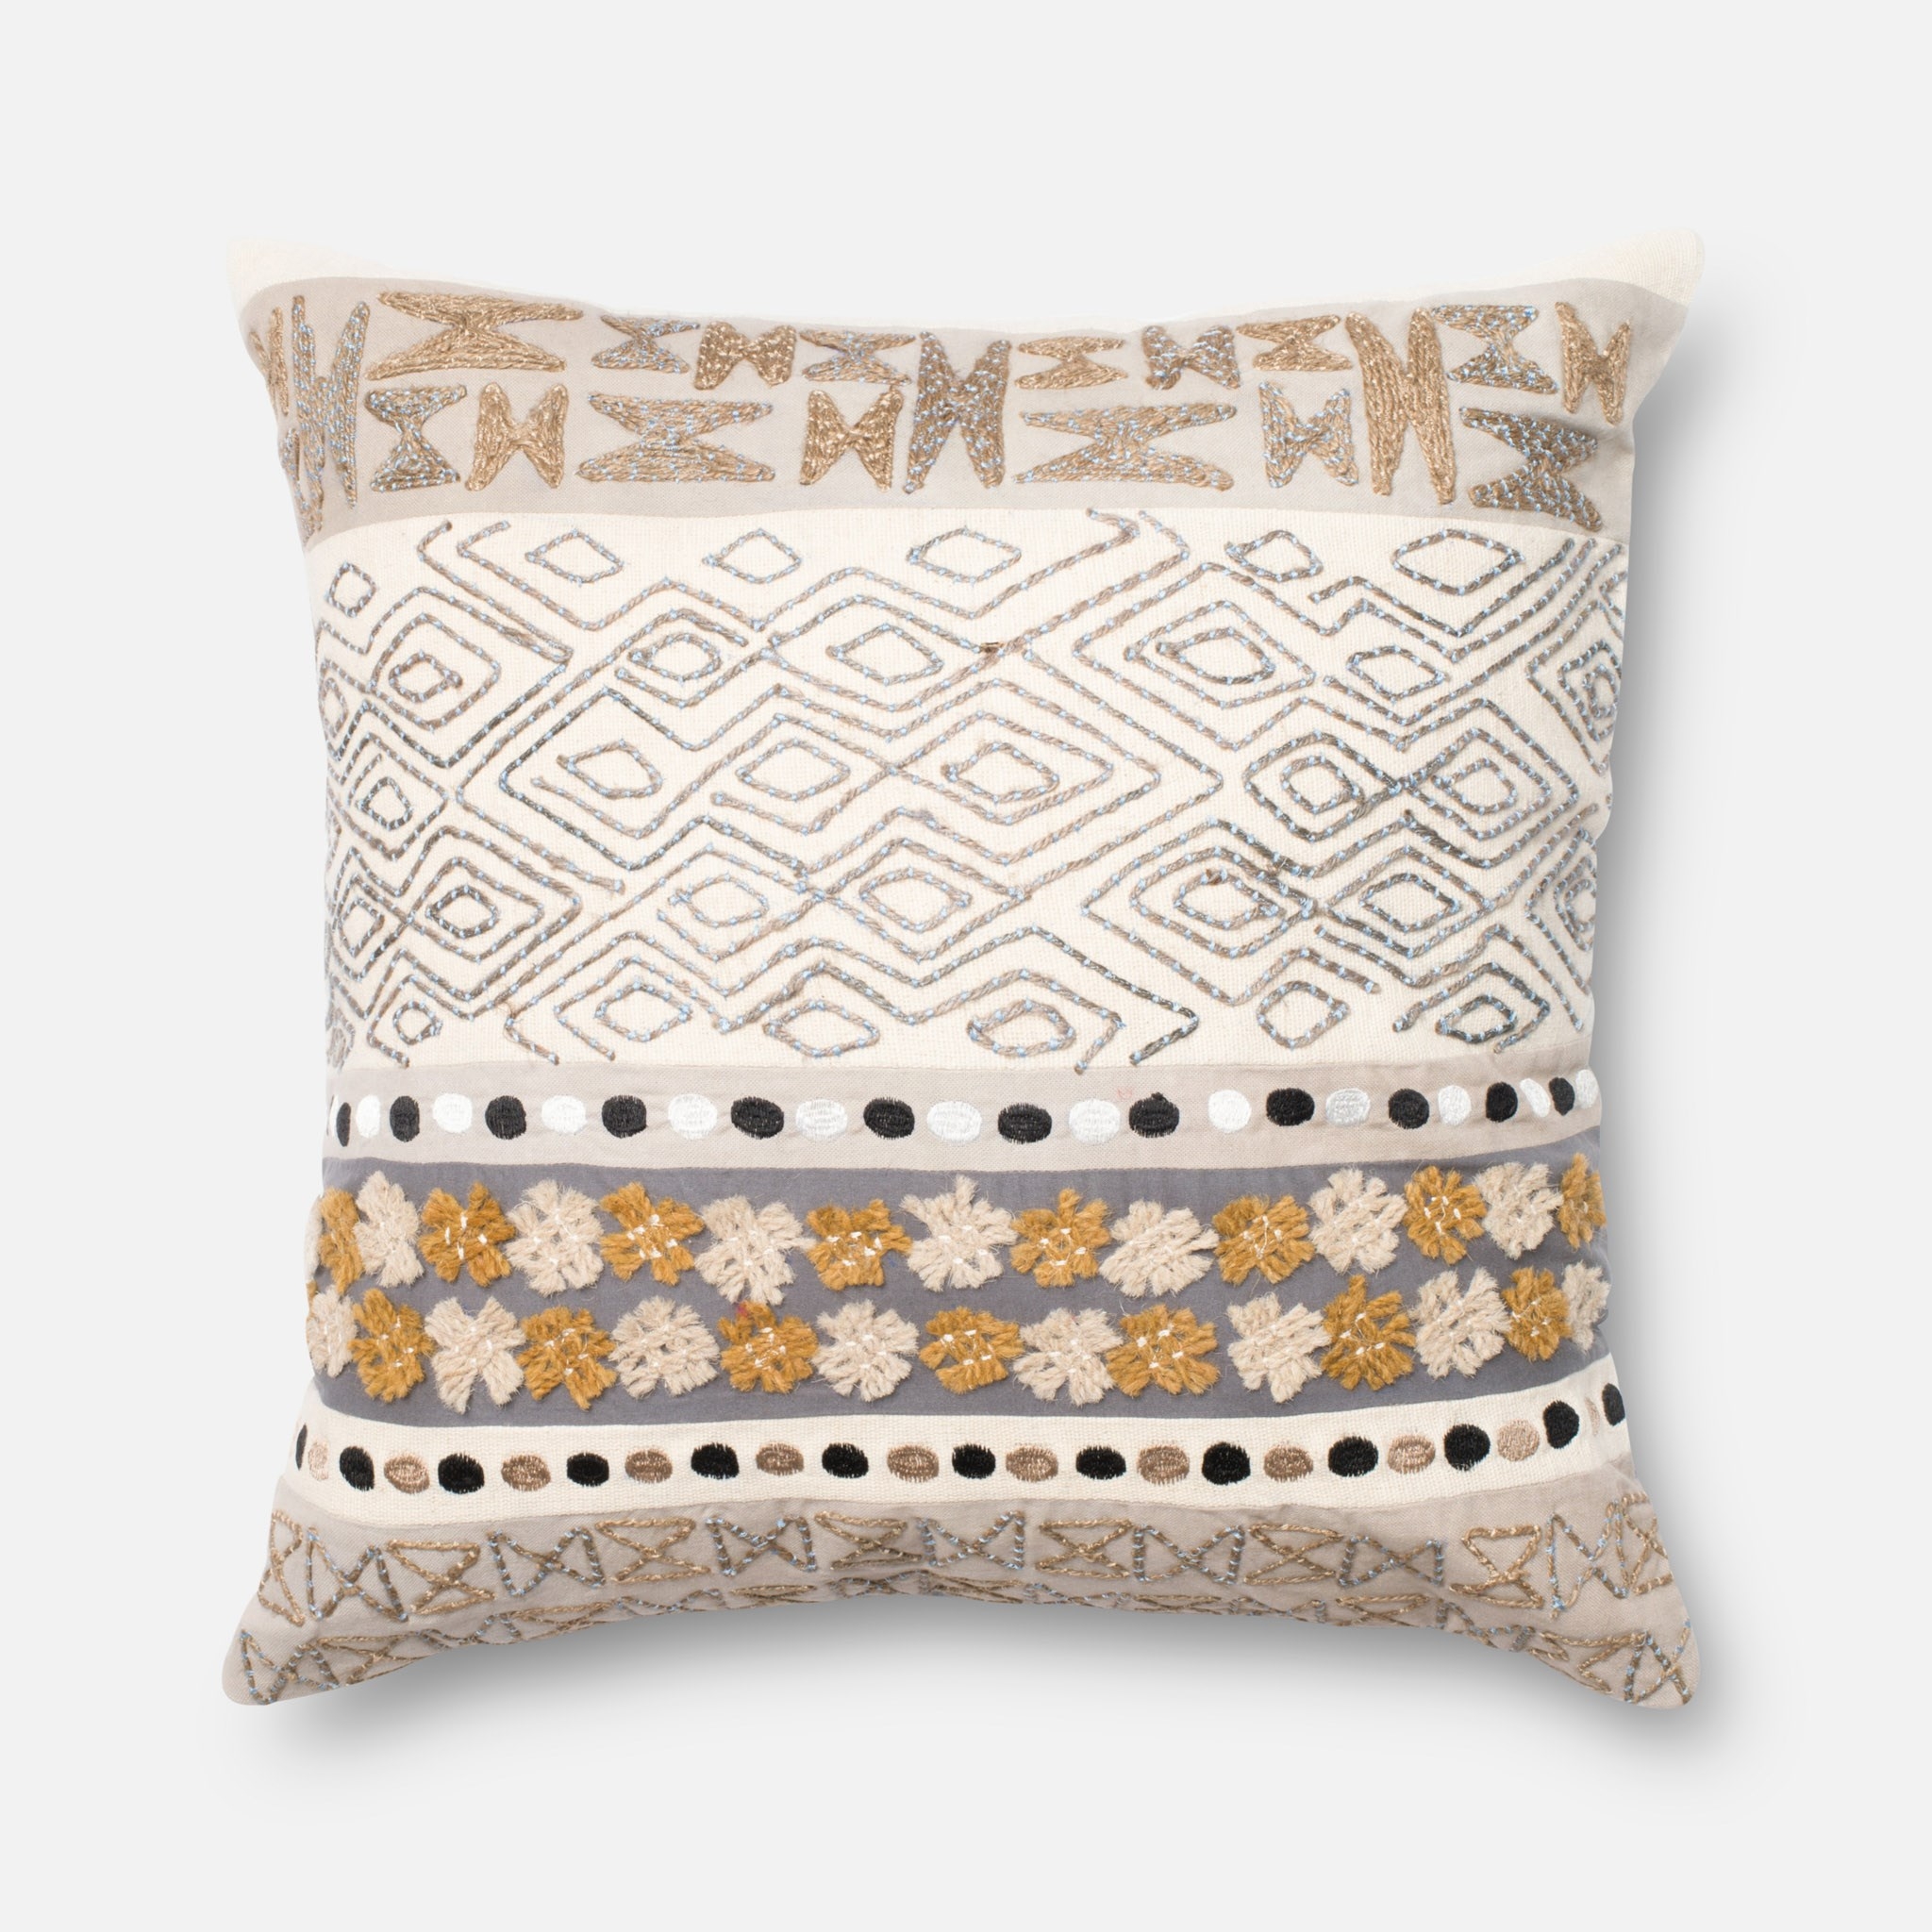 PILLOWS - BEIGE / GREY - 22" X 22" Cover w/Down - Image 0